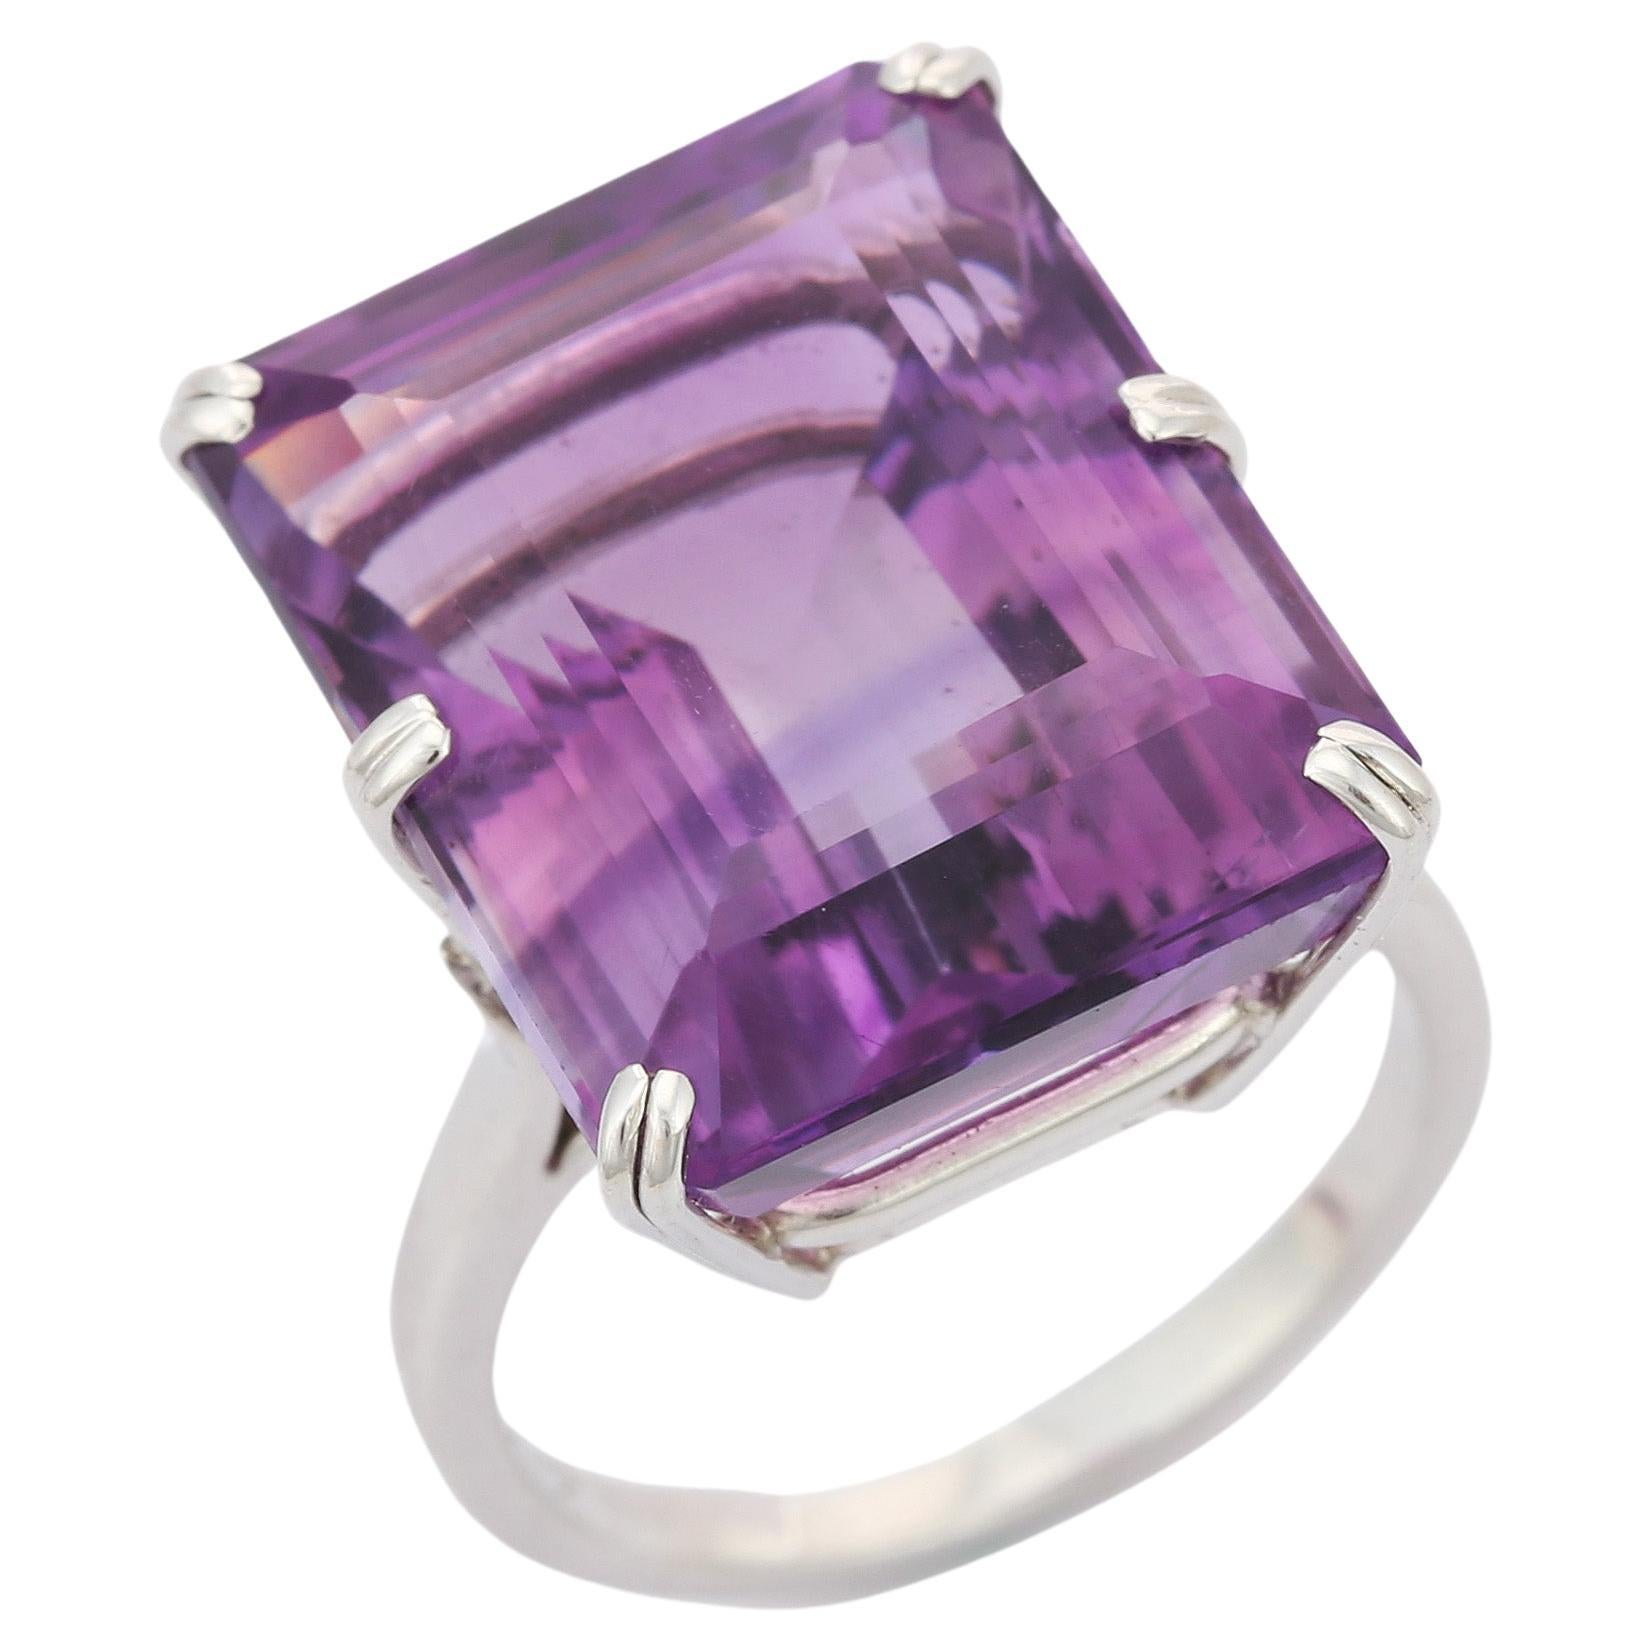 18K White Gold Art Deco Style 23.70 Ct. Octagon Amethyst Cocktail Ring